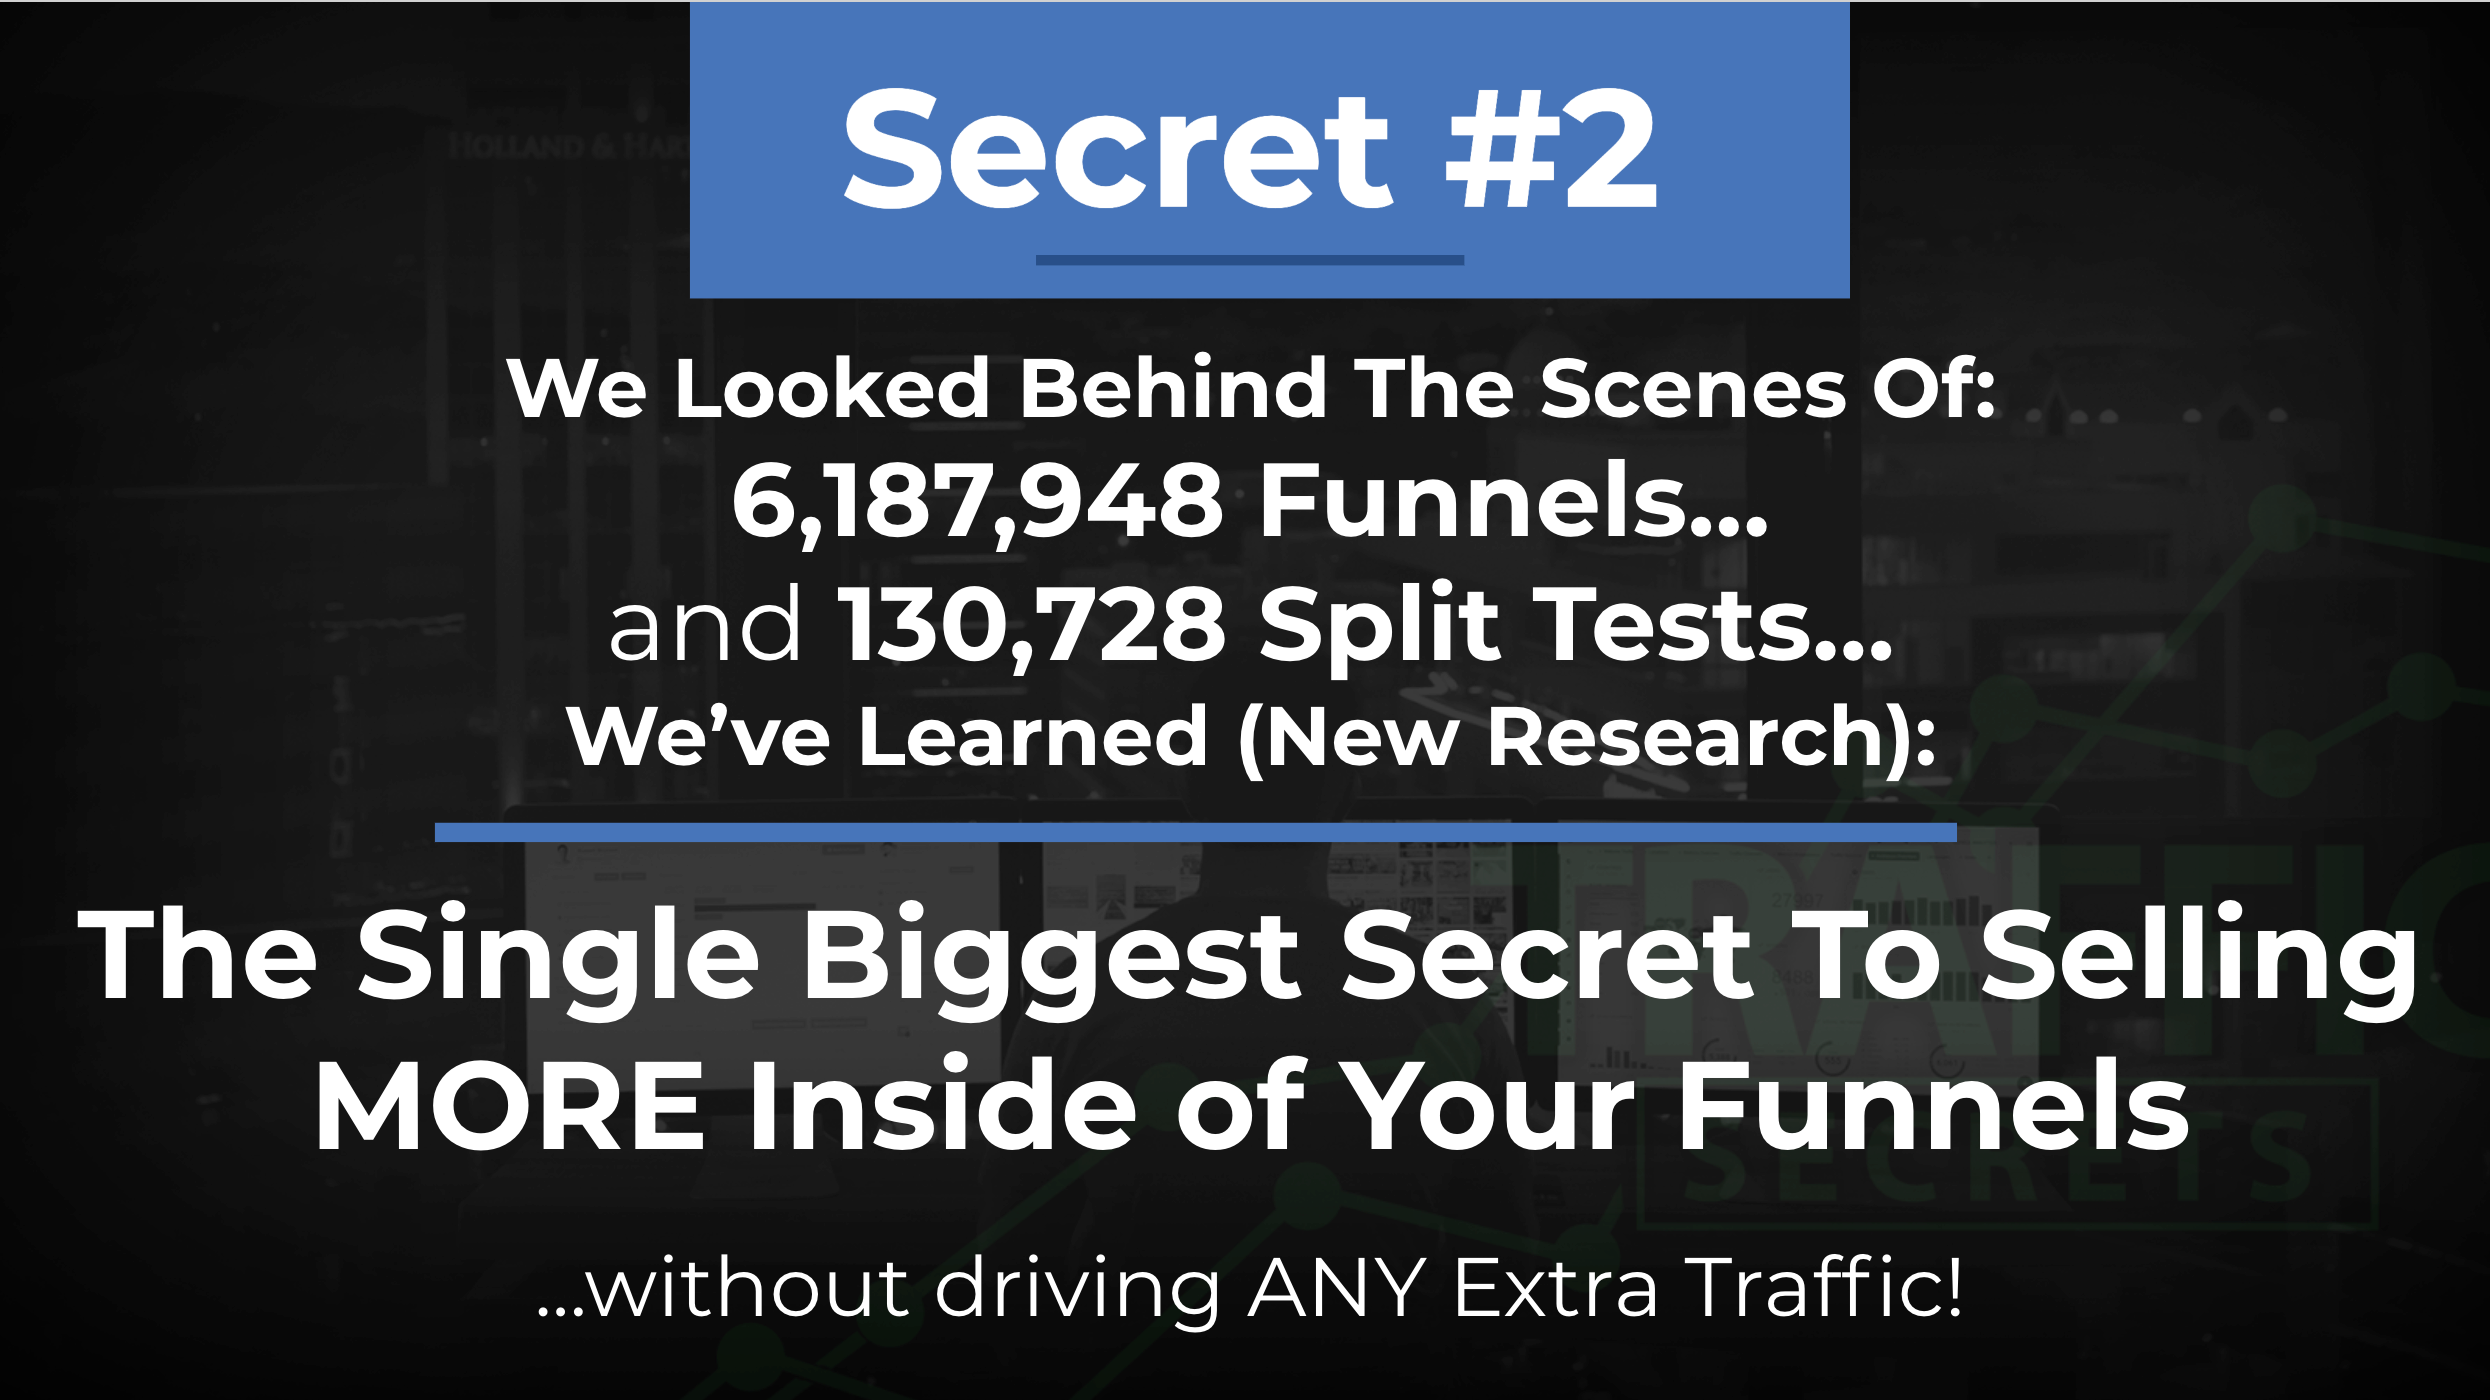 Secret #2 We looked behind the scenes of 6,187,948 funnels and 130,728 split tests... we've learned (new research): the single biggest secret to selling more inside of your funnels without driving any extra traffic